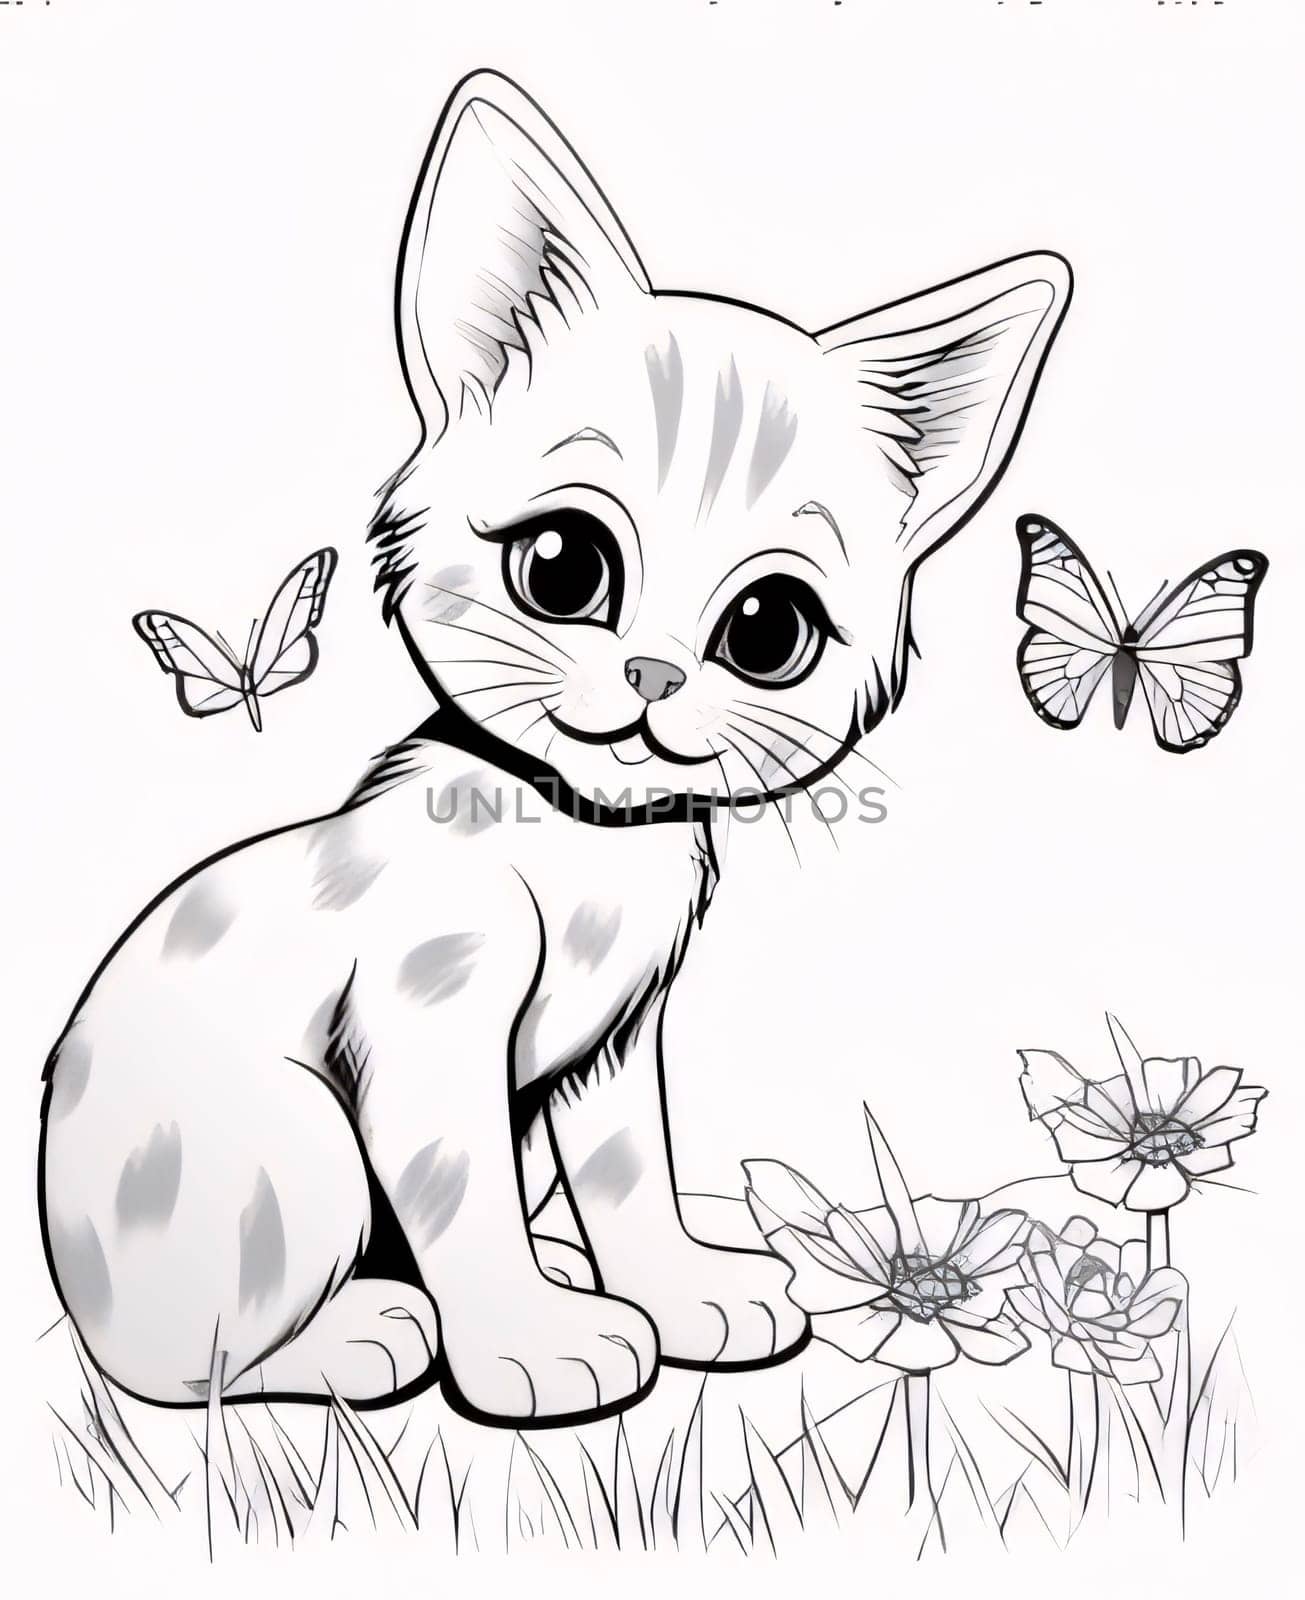 Beautiful spring illustration: Illustration of a kitten sitting in the grass with flowers and butterflies